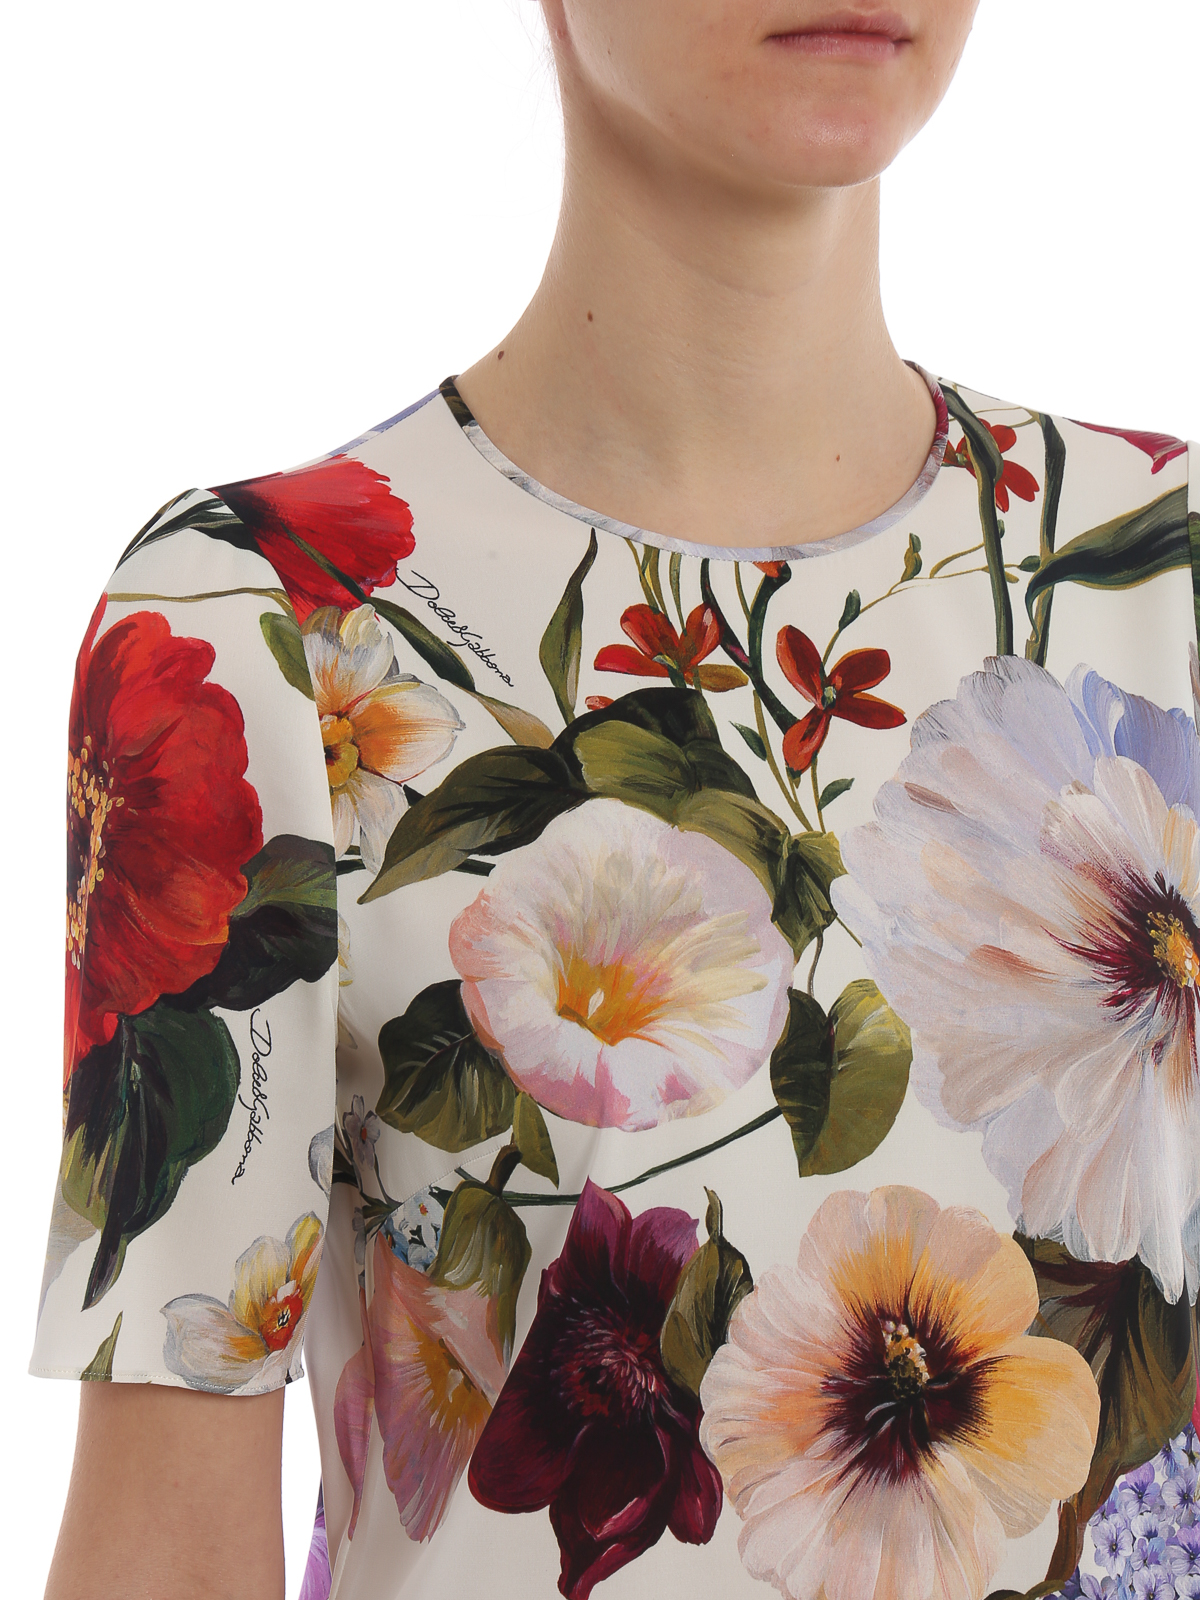 dolce and gabbana floral blouse